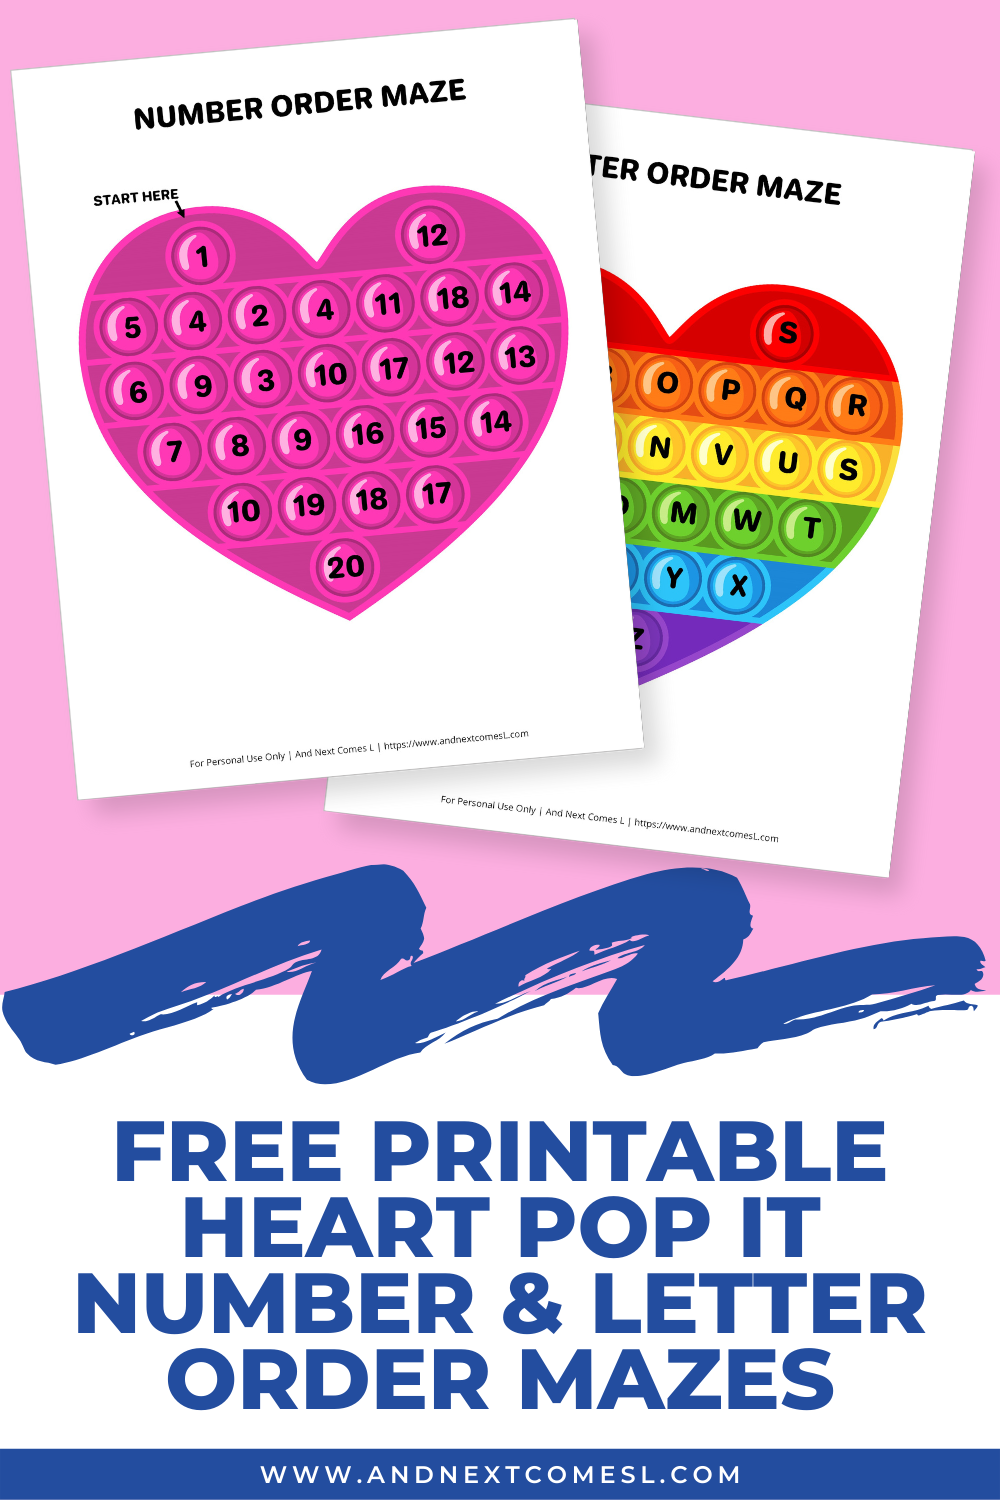 Free printable heart pop it number order & letter order mazes for kids - makes for a great Valentine's Day activity!